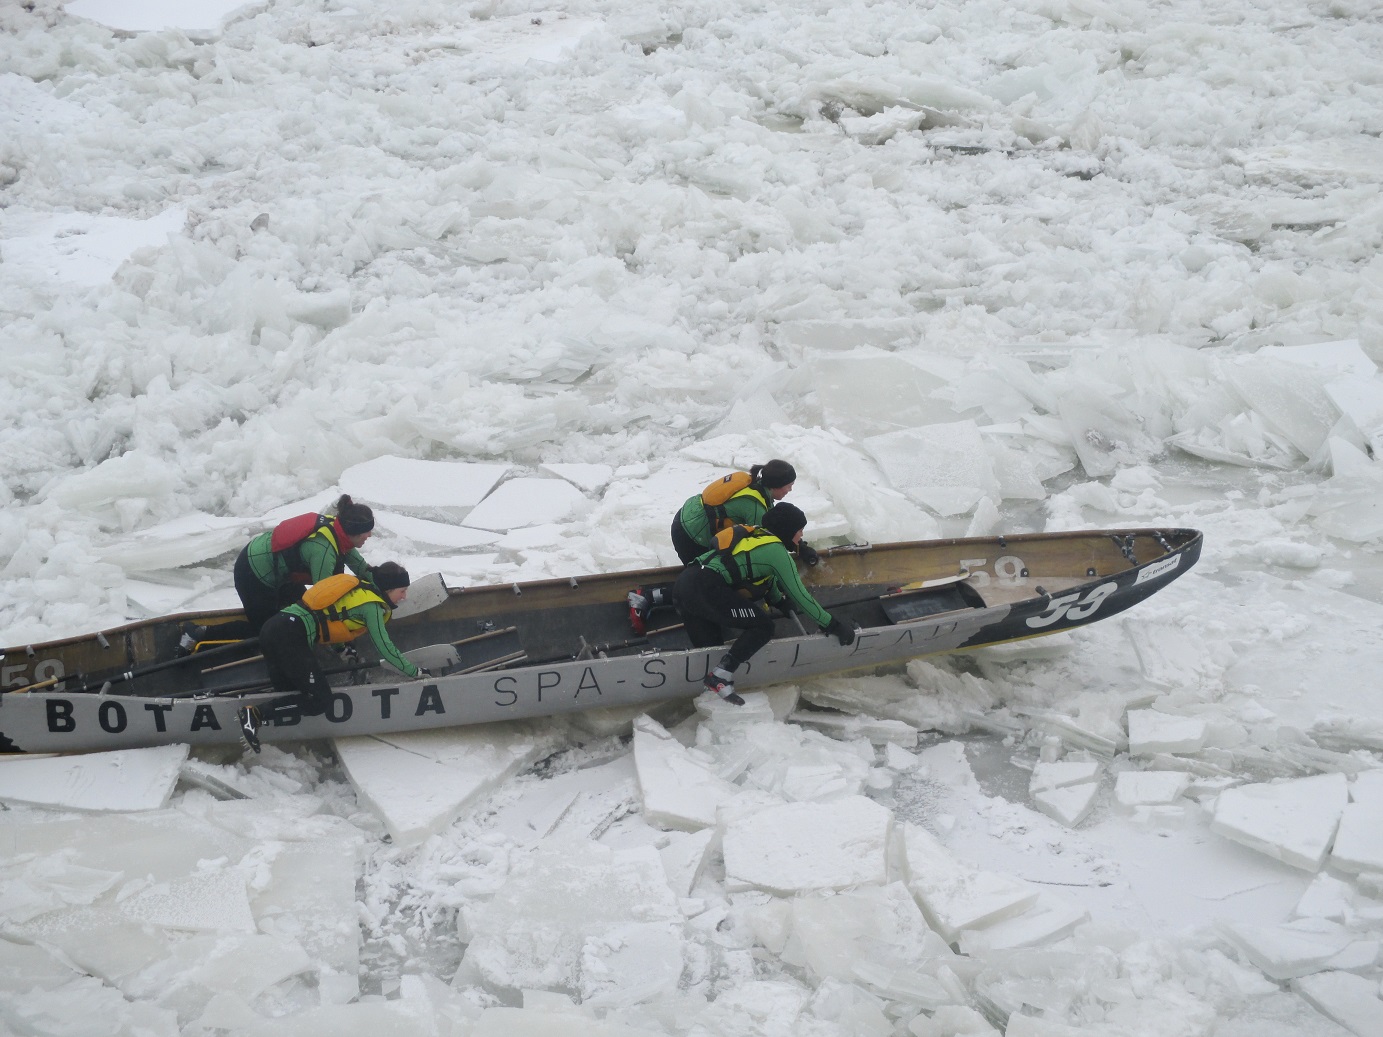 A crew in the elite female class work to get their canoe across the ice. (Photo by Marlene Greer)